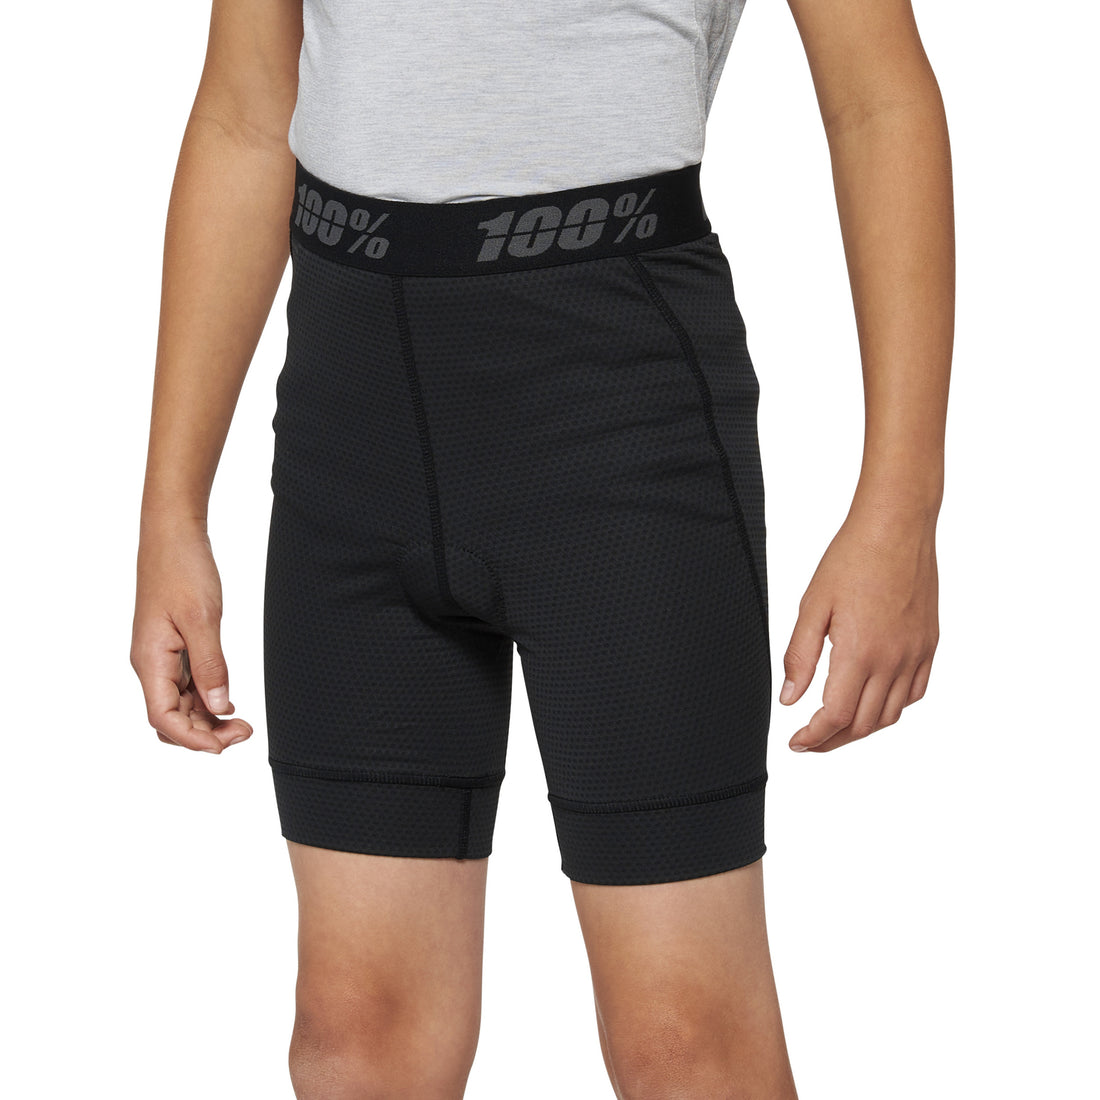 100 Percent Ridecamp Youth MTB Shorts With Liner